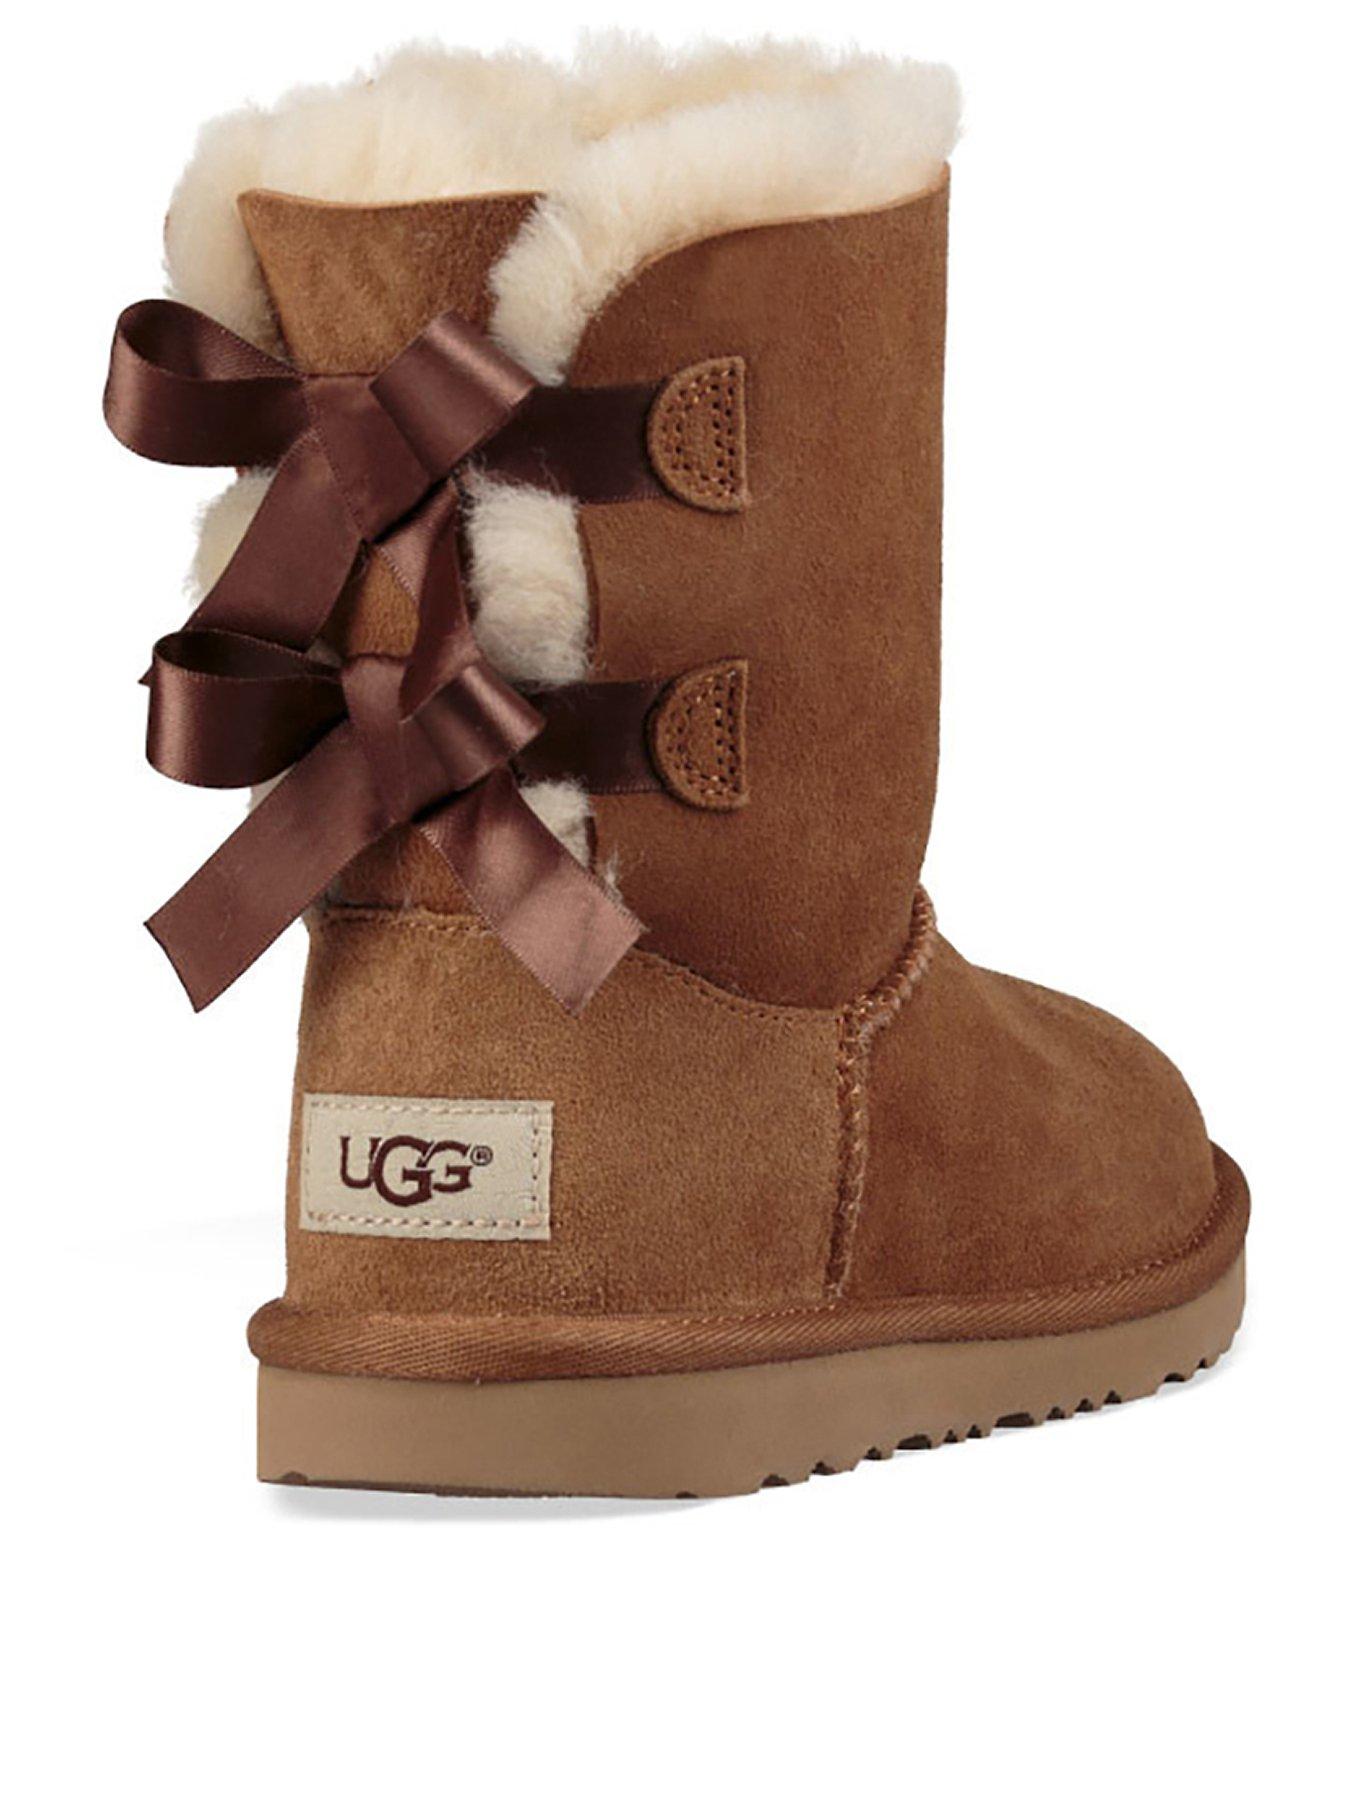 ugg boots w bows